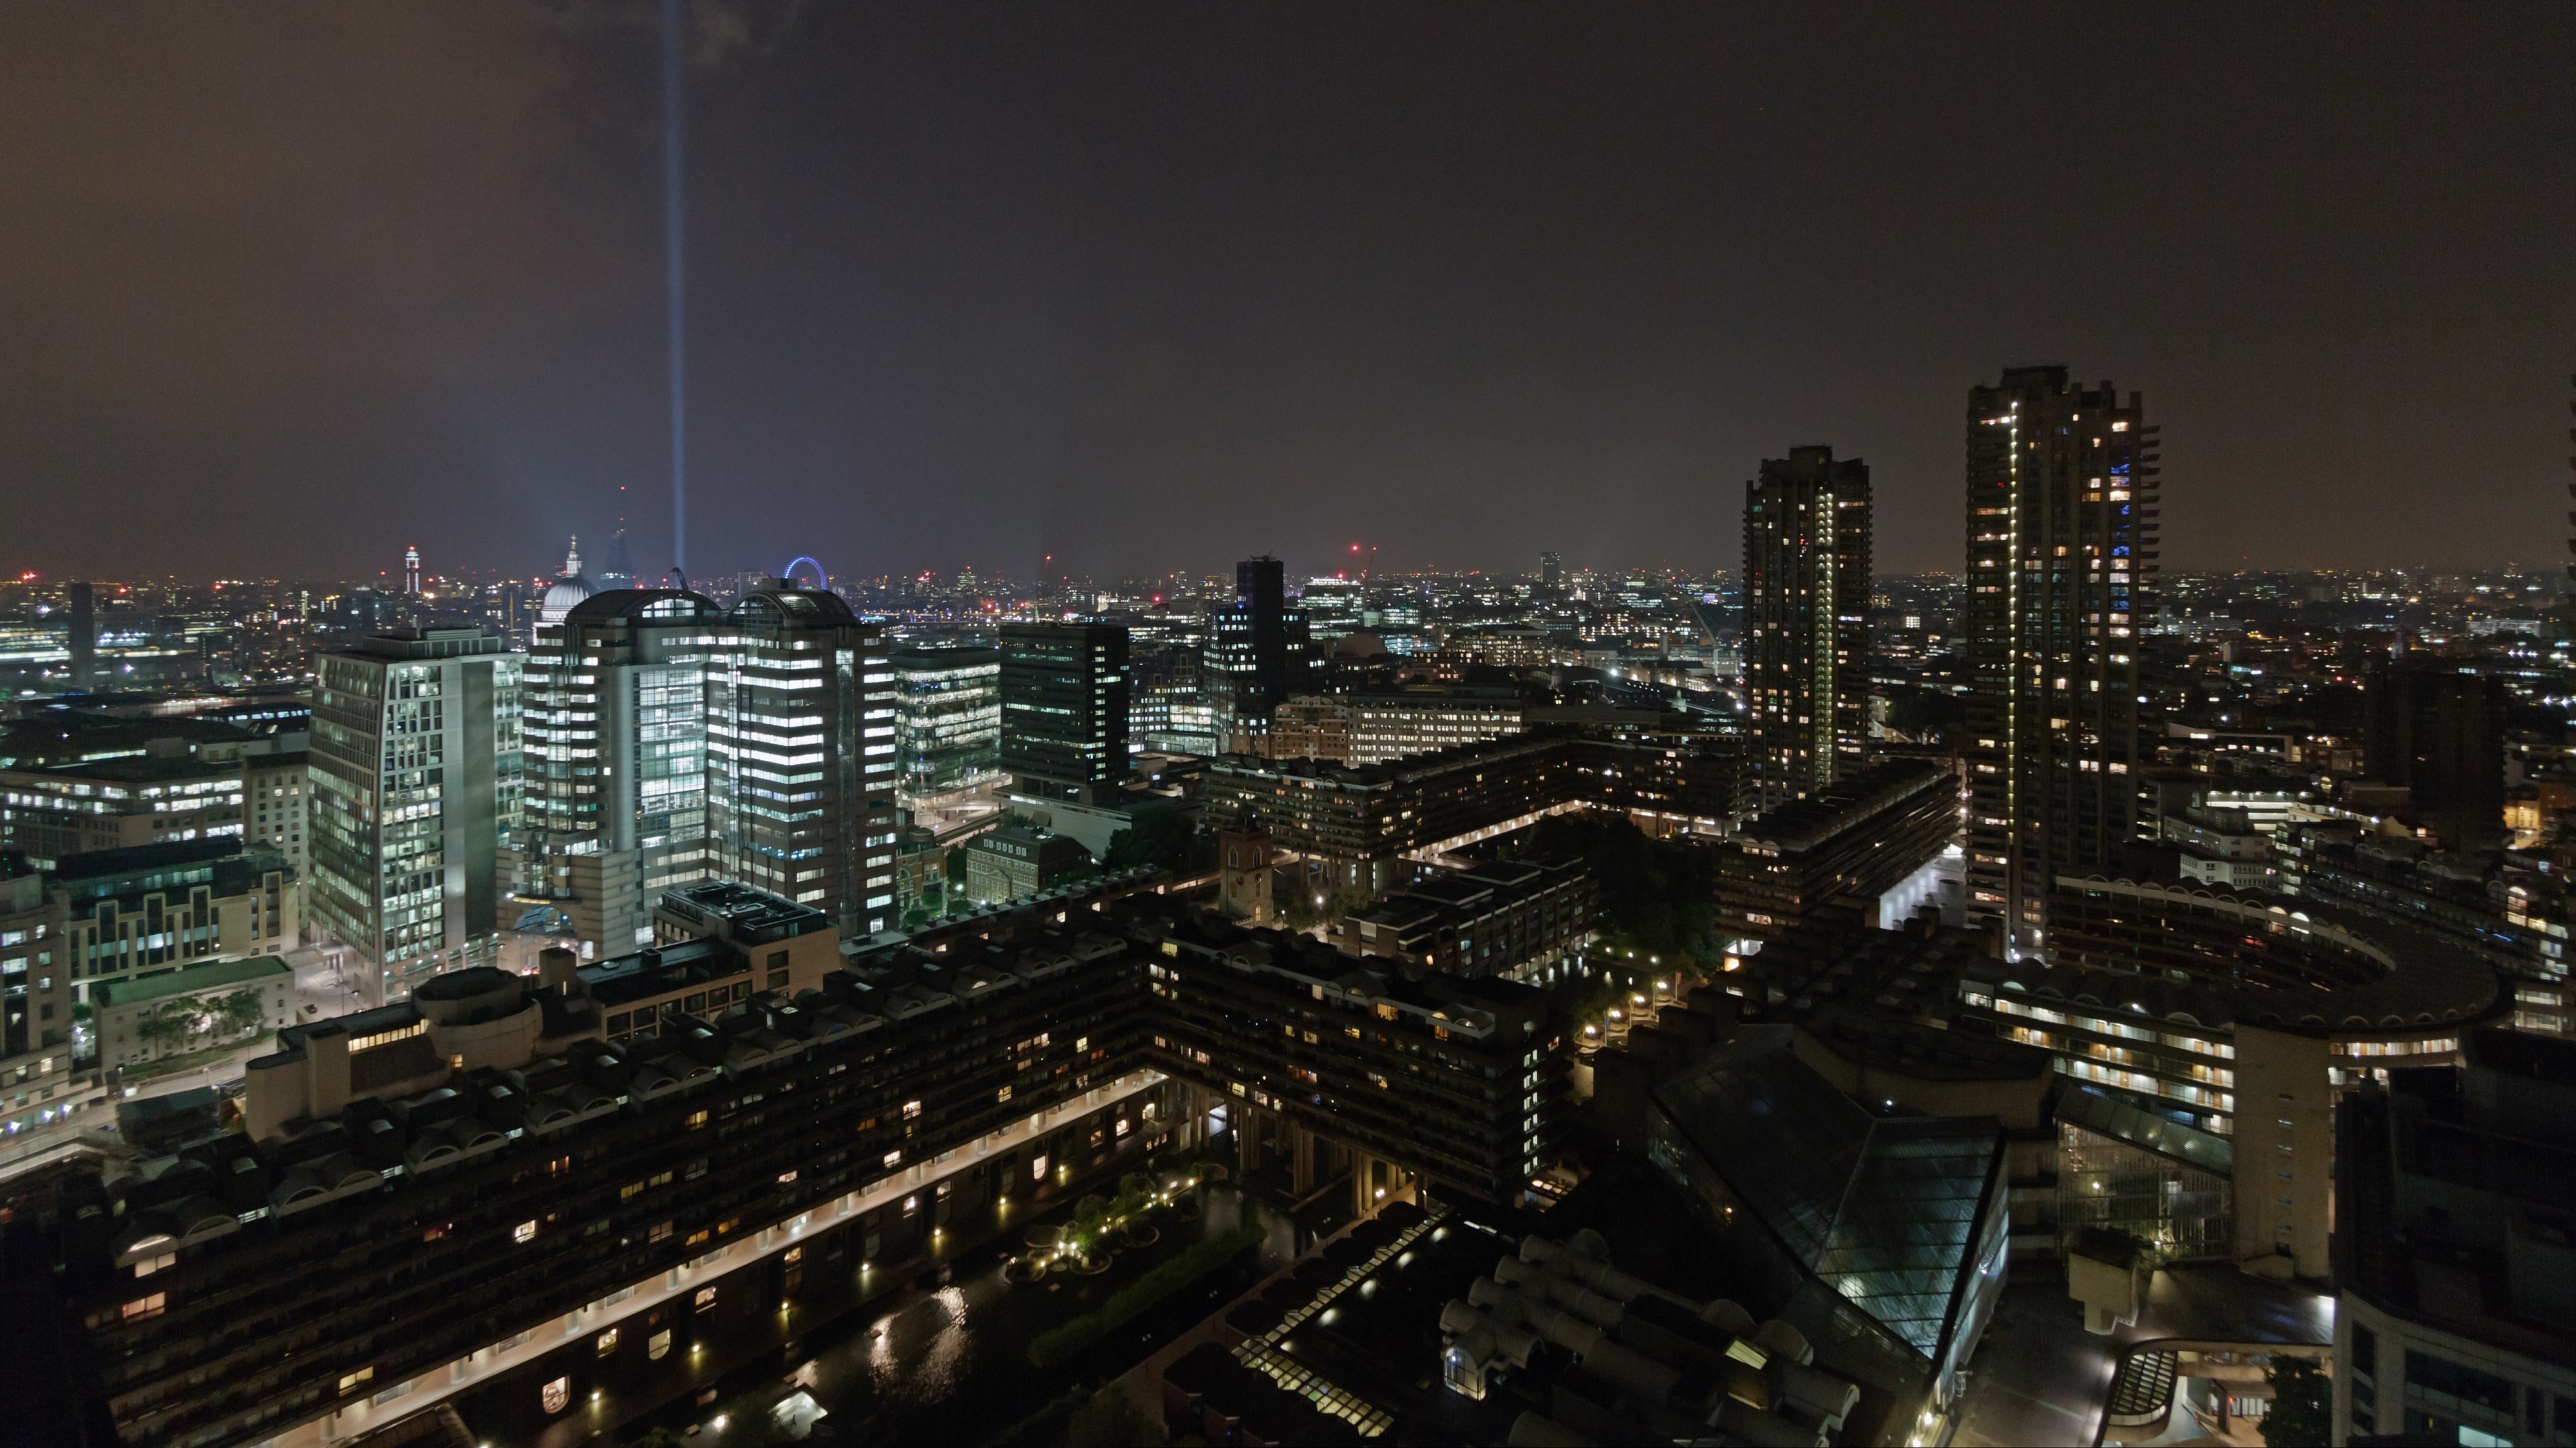 Barbican by night from The Heron (14711136049)